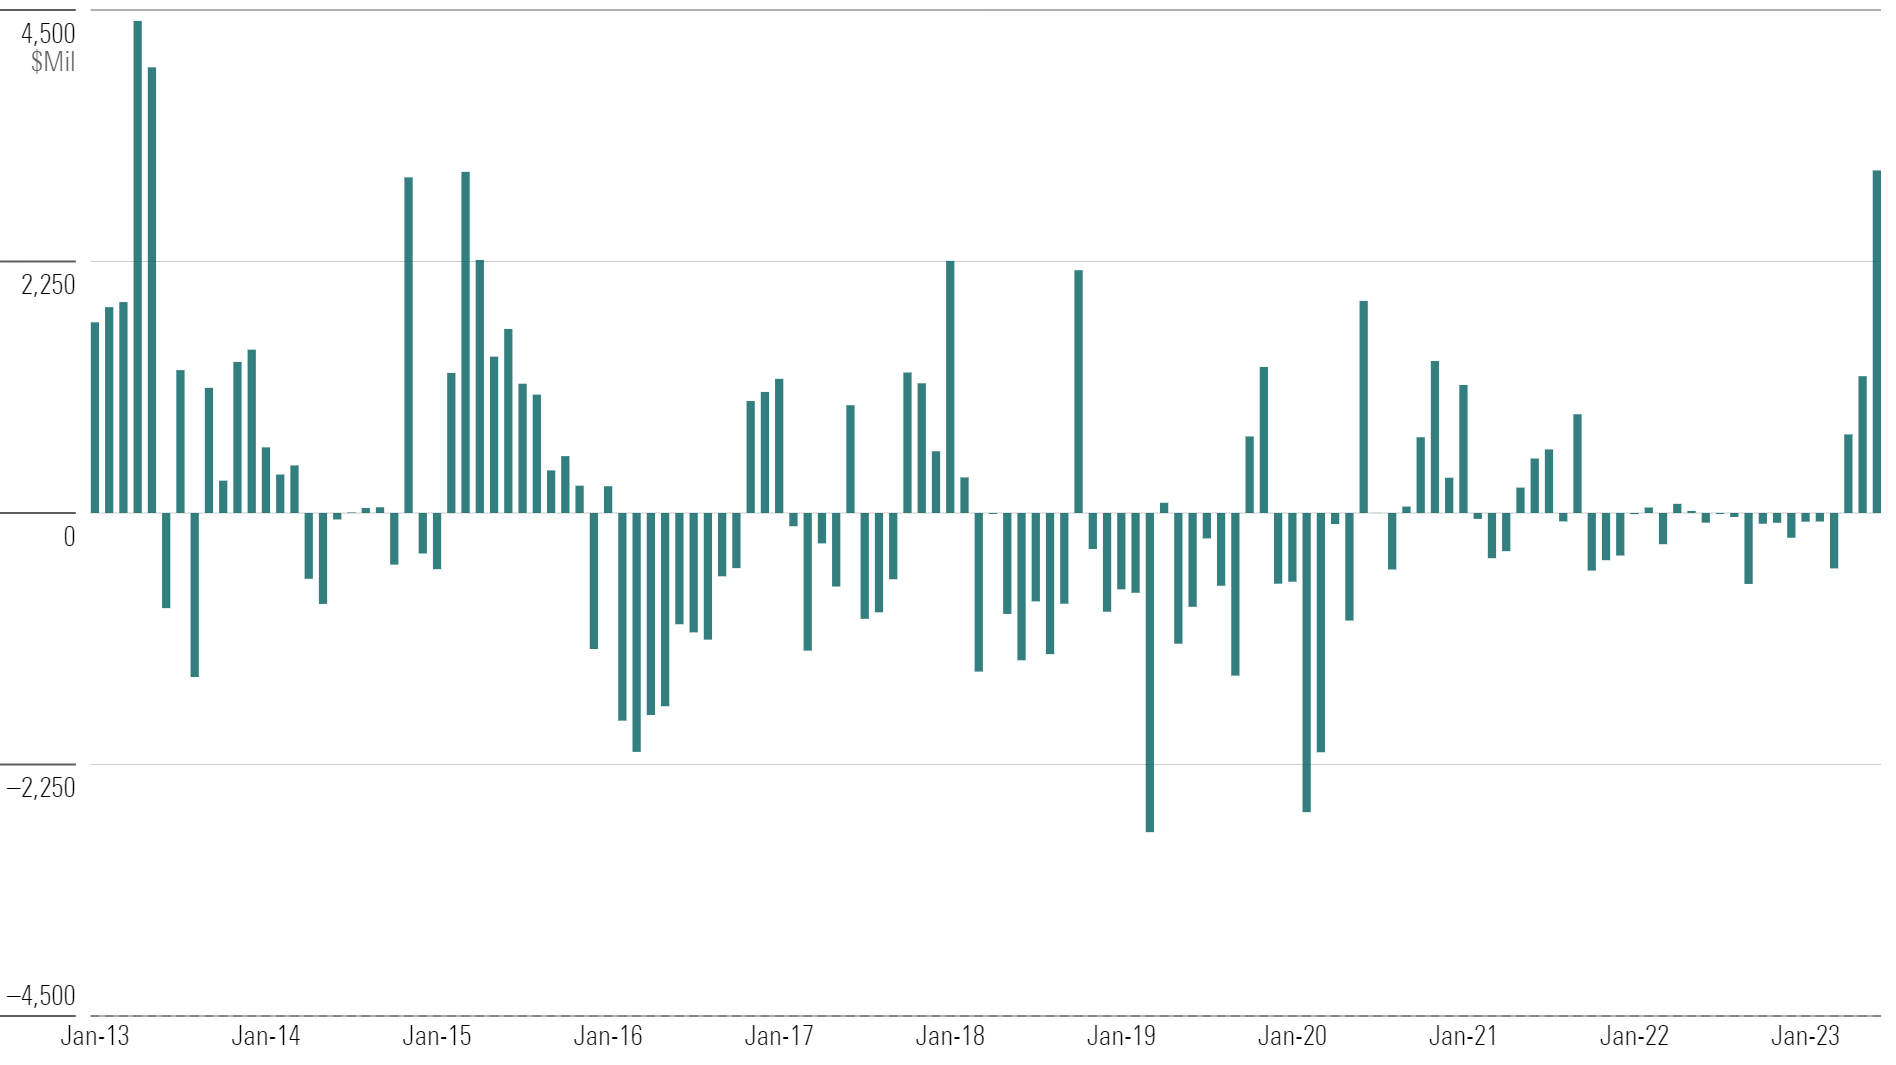 Bar chart of monthly Japan-stock flows.